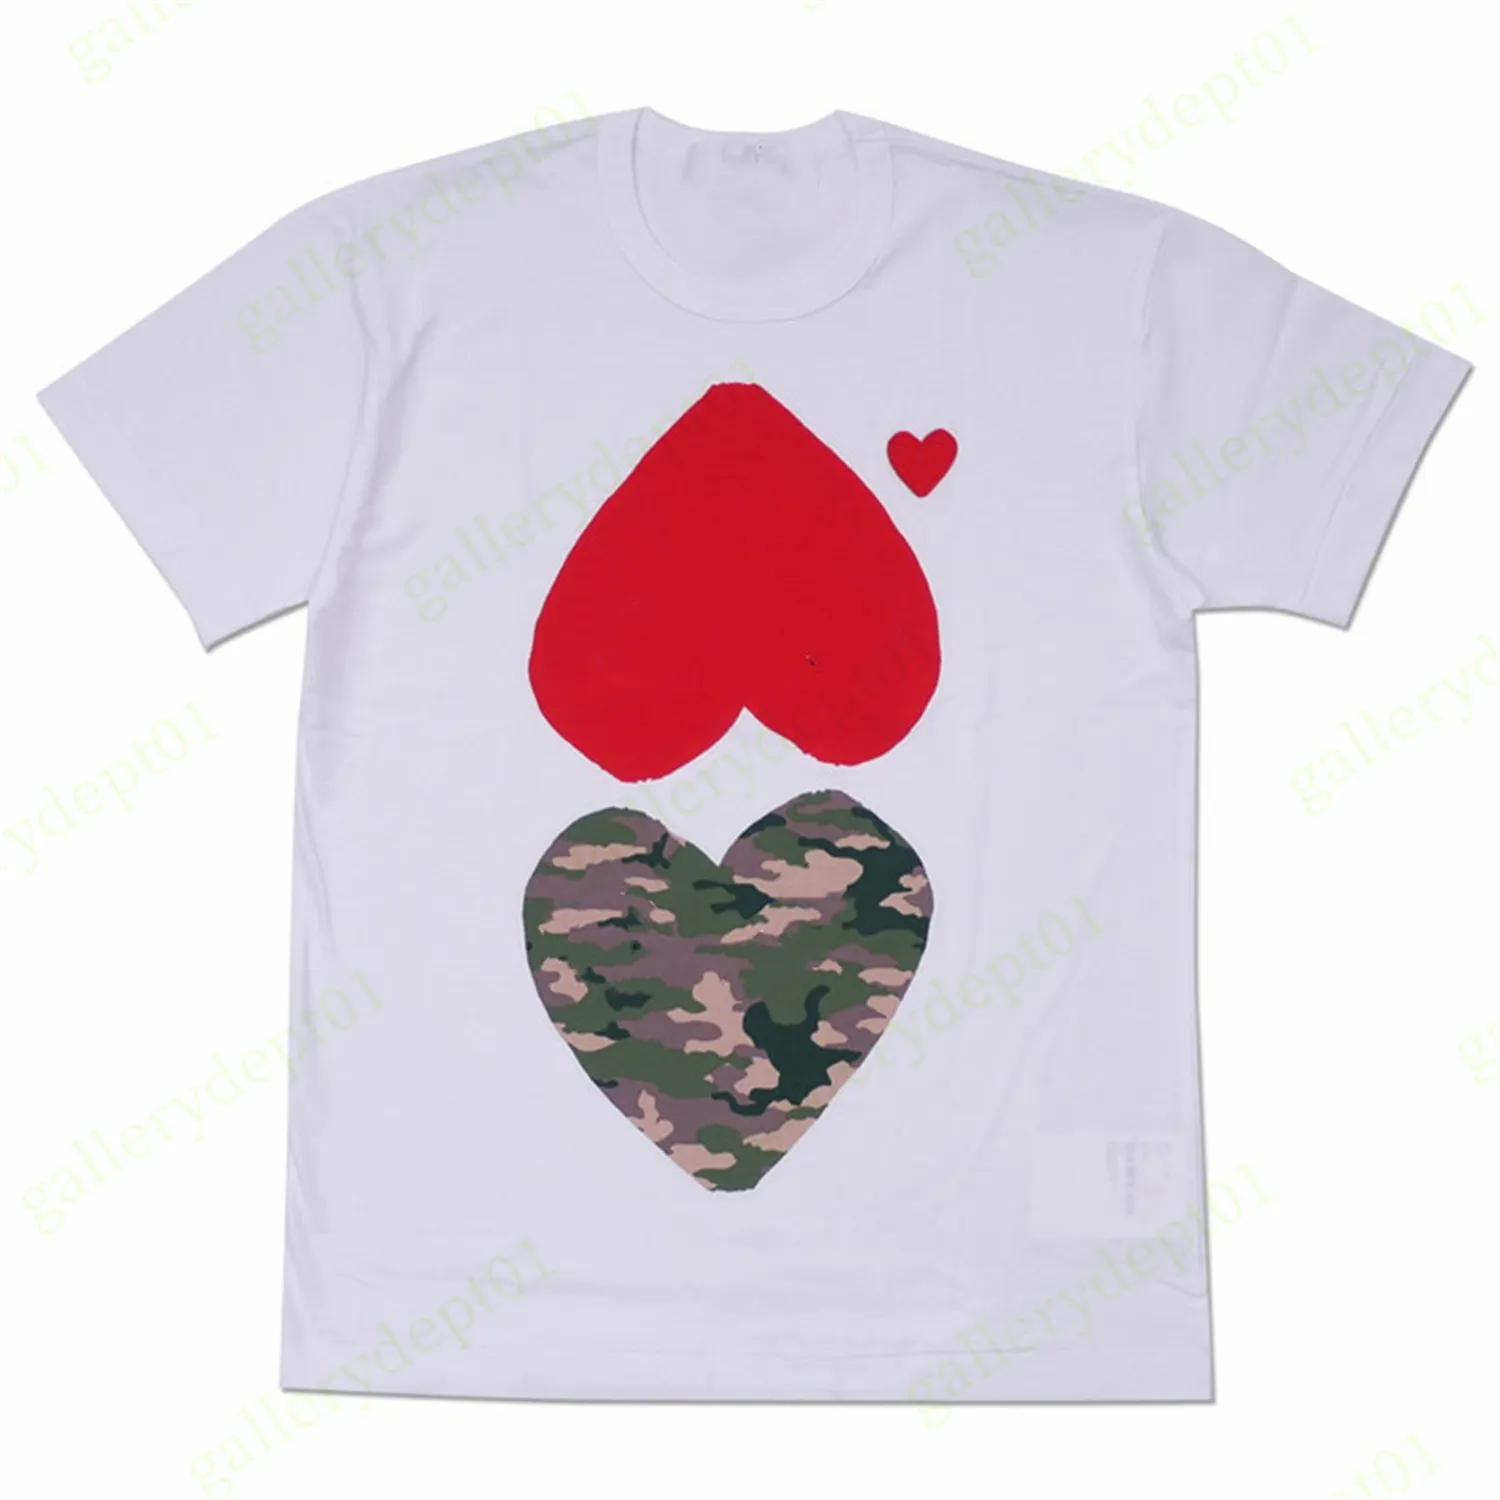 mens t shirts designer t shirt red heart on white side tshirts couple models love clothes graphic tees Round neck cotton short-sleeved shirts camouflage t-shirt m-4xl A2